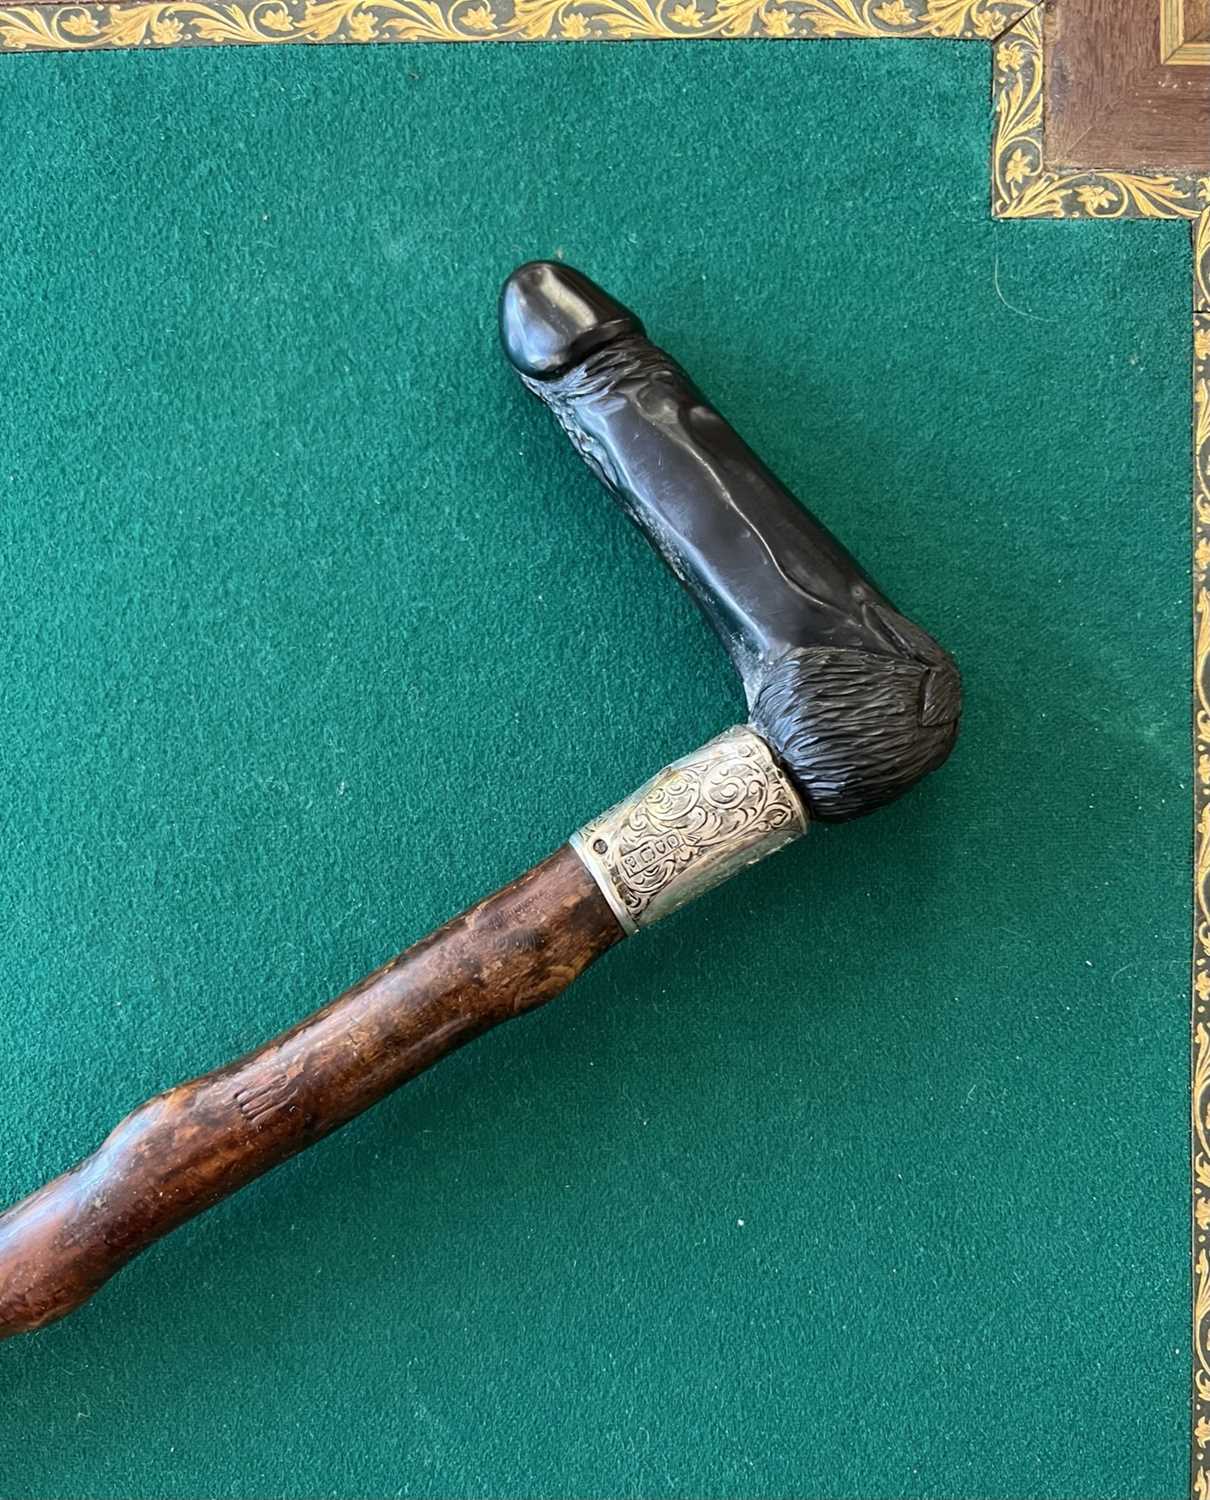 A LATE 19TH CENTURY WALKING CANE WITH EROTIC HANDLE - Image 4 of 7